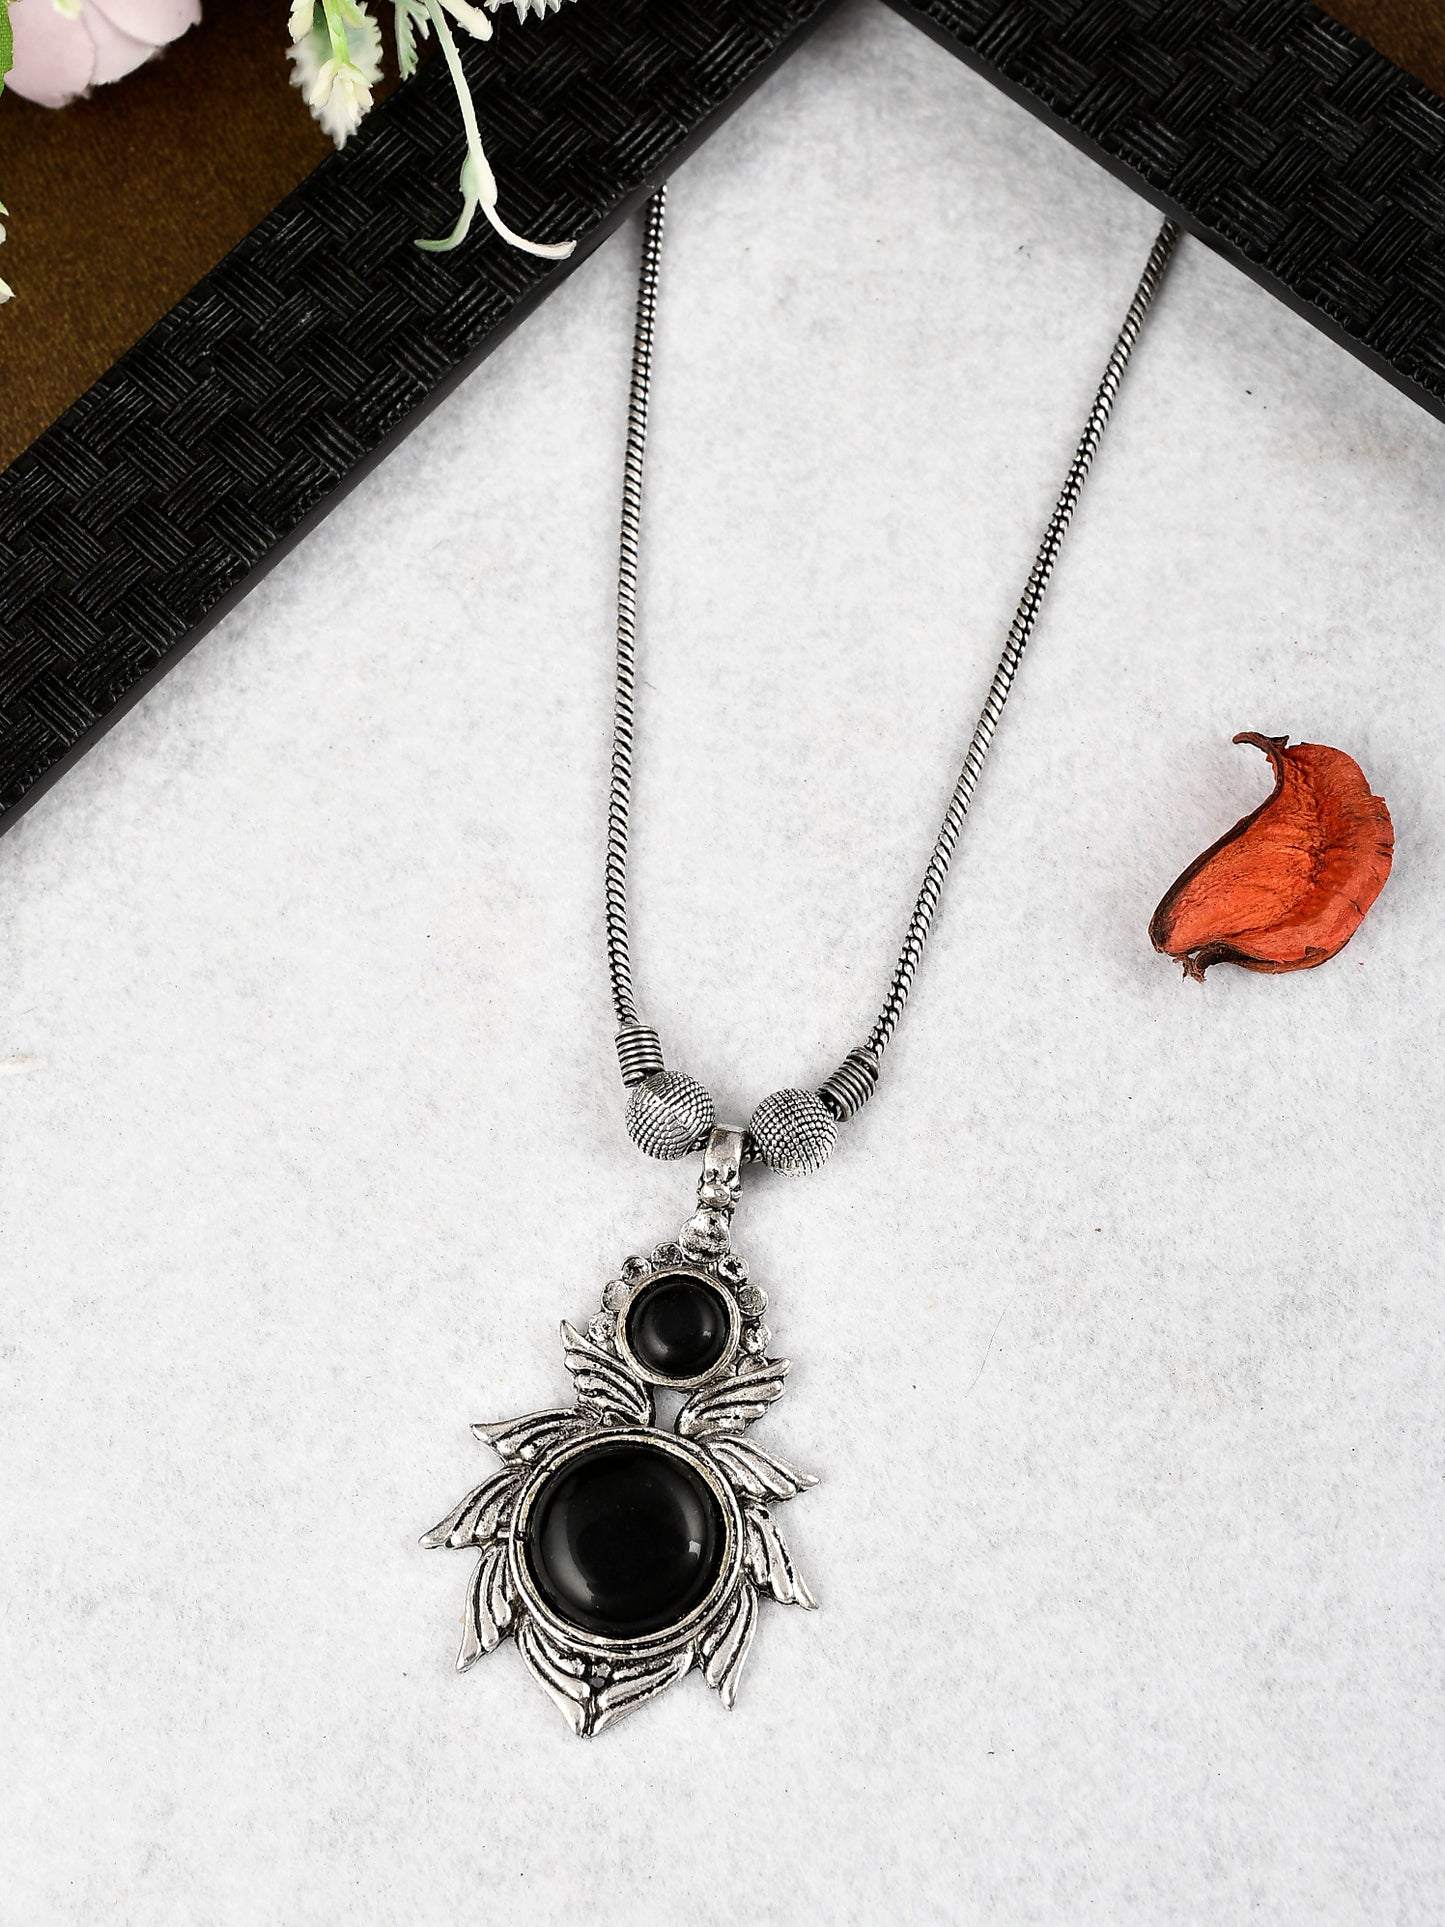 Silver Plated Oxidised Black Stone Studded Contemporary Necklace